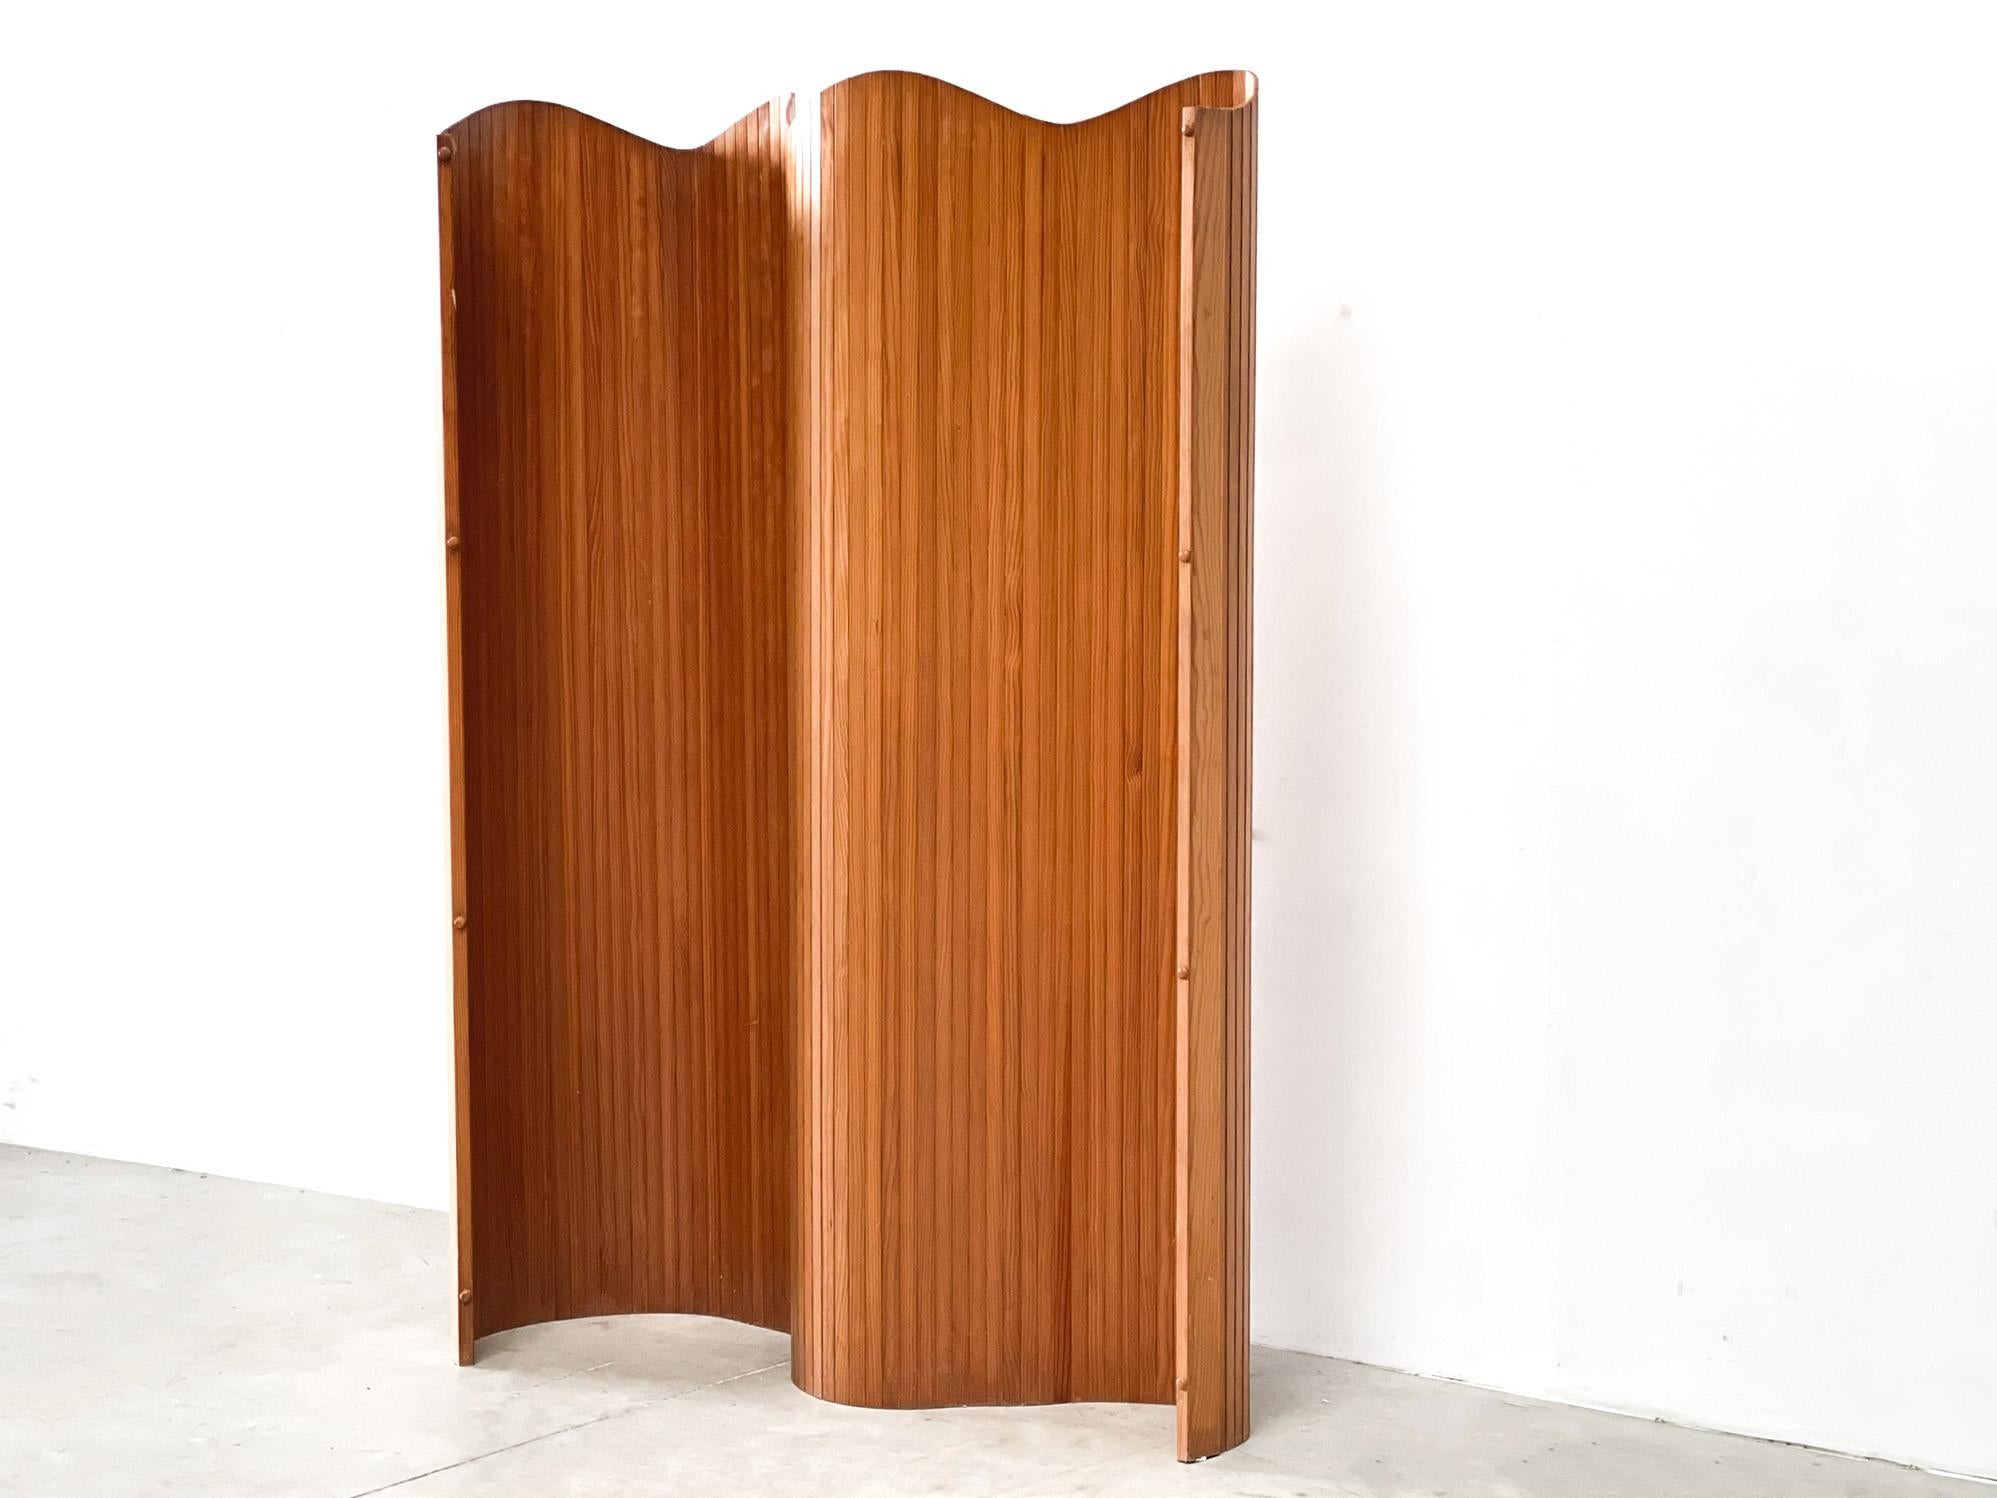 Antique wooden 'lamelle' room divider by Jomain Baumann, it can be rolled up and is easy to store away.

Good condition with normal age related wear.

Very elegant and decorative piece

1930s - France

Height: 175cm/68.89